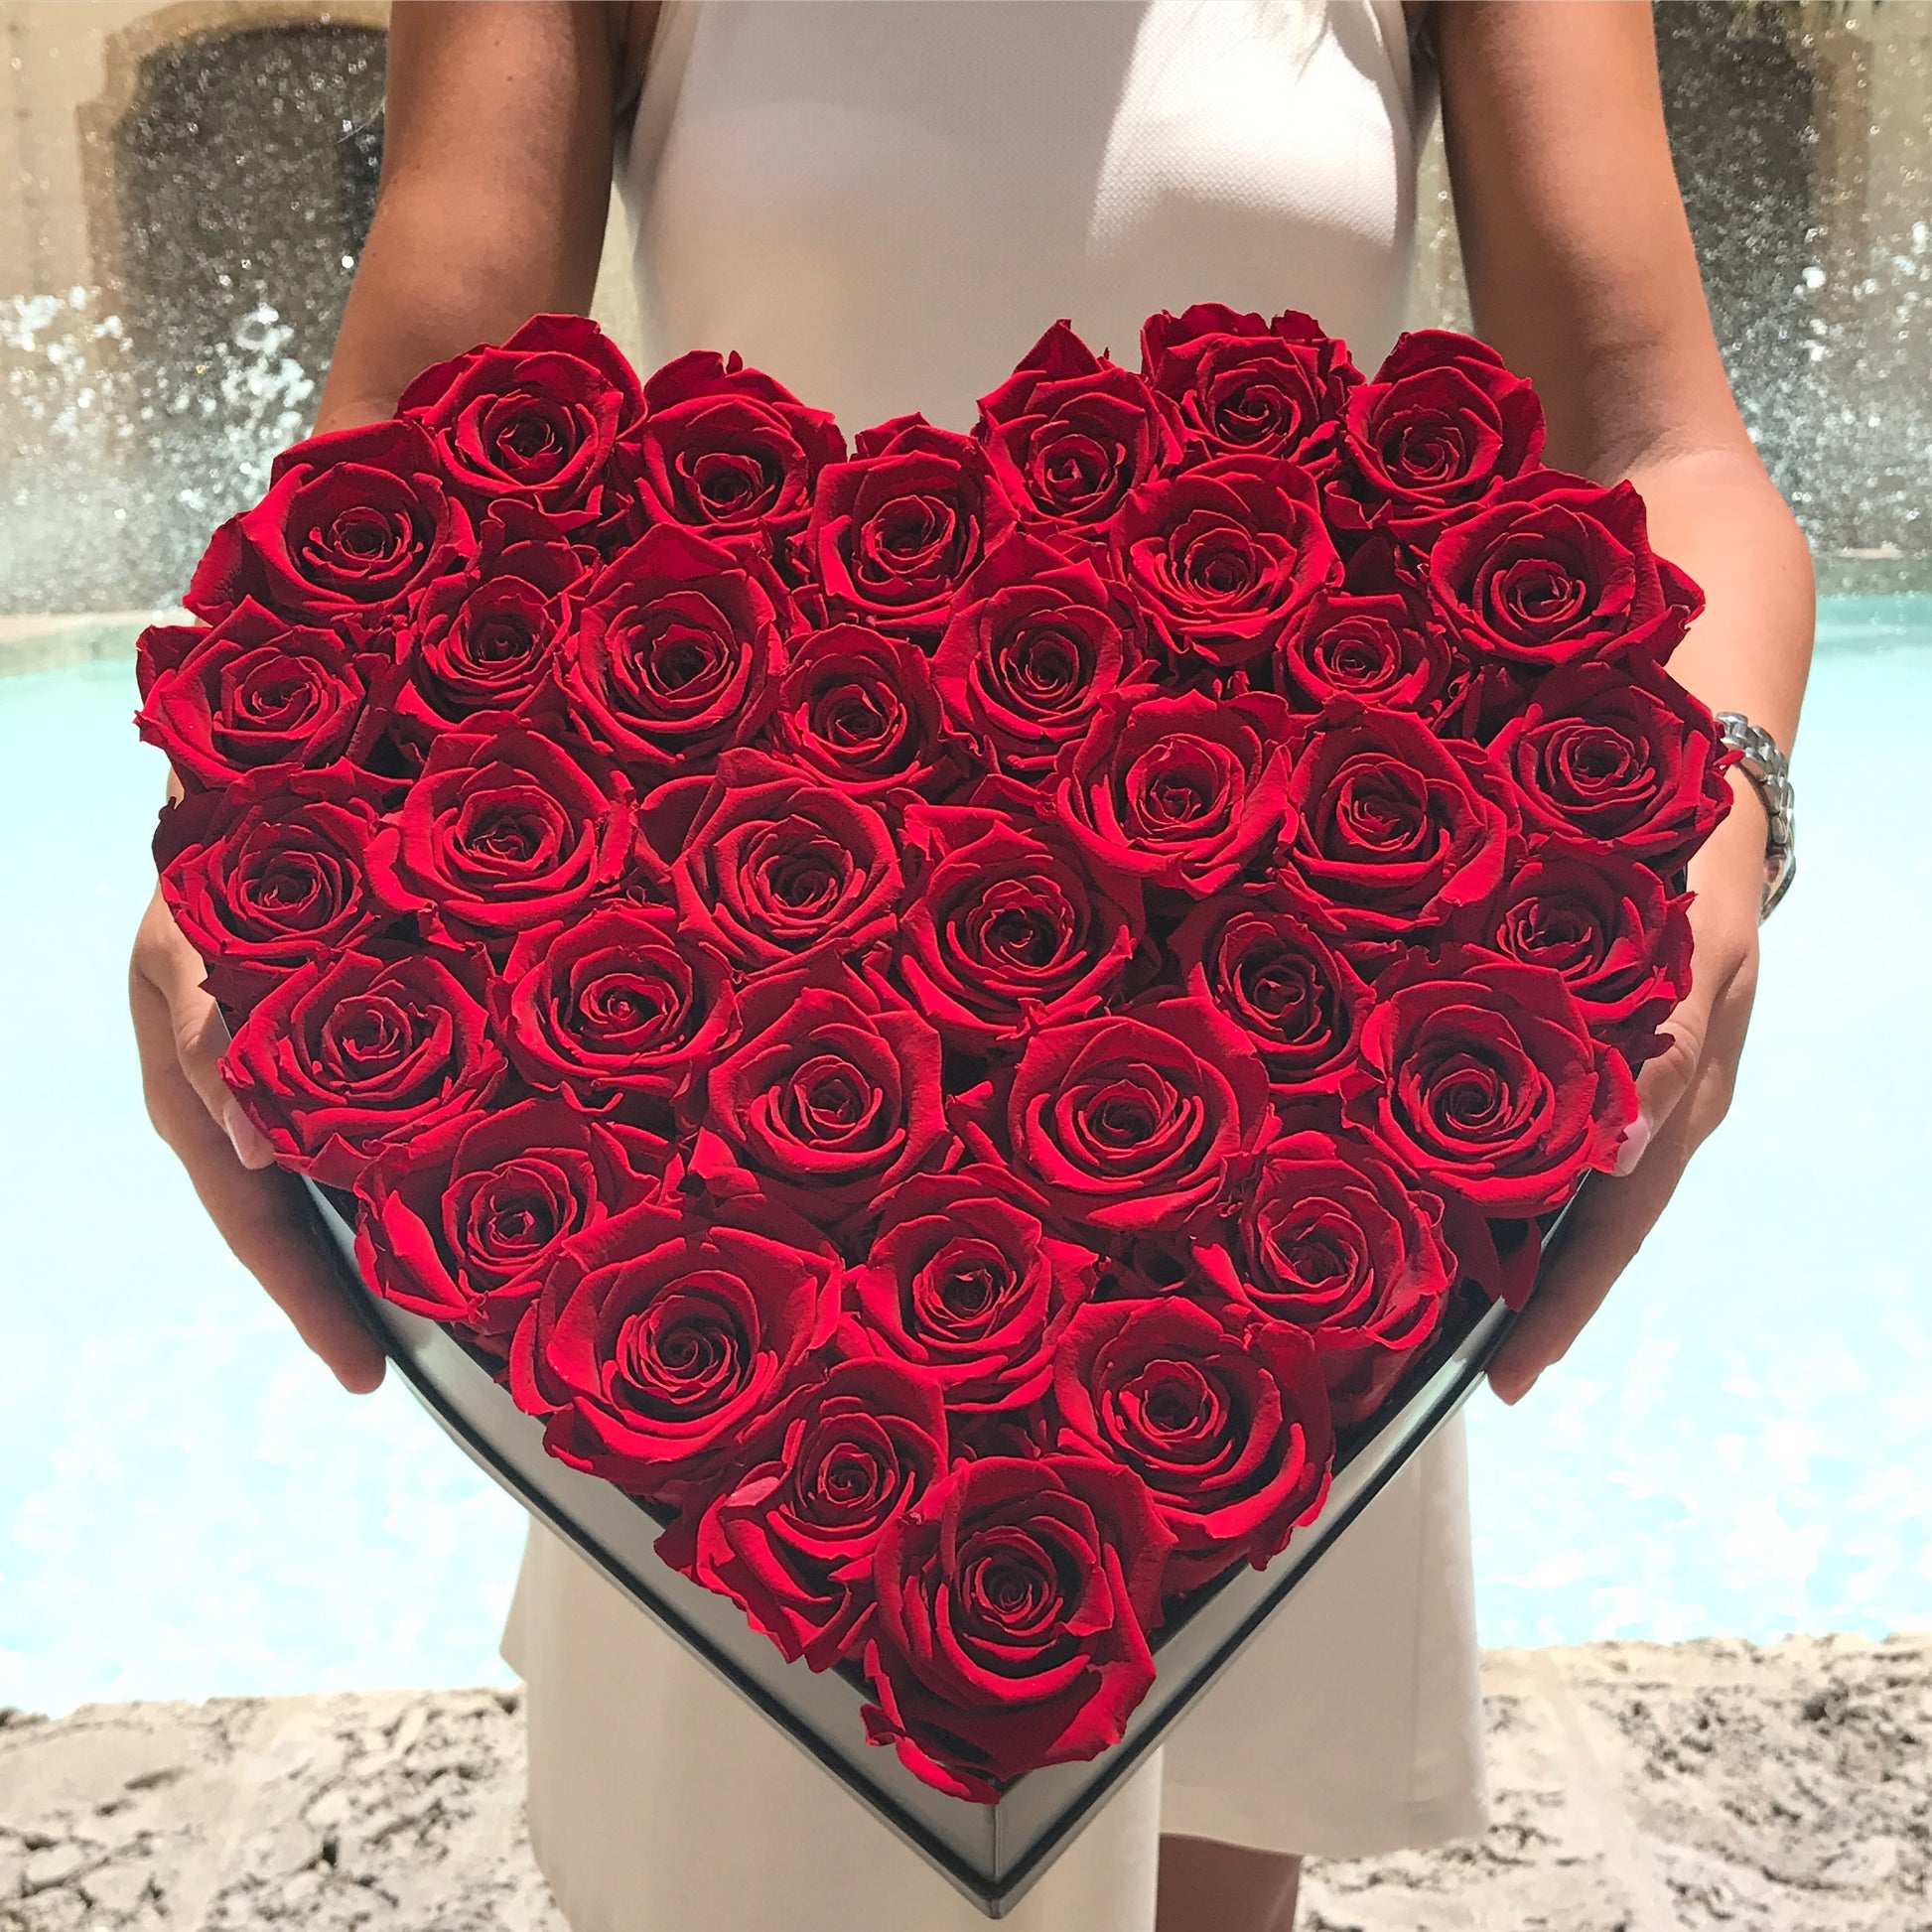 Real Long Lasting Roses - Heart Shaped Box - Lifetime is Over 1 Year - The Royal Roses 